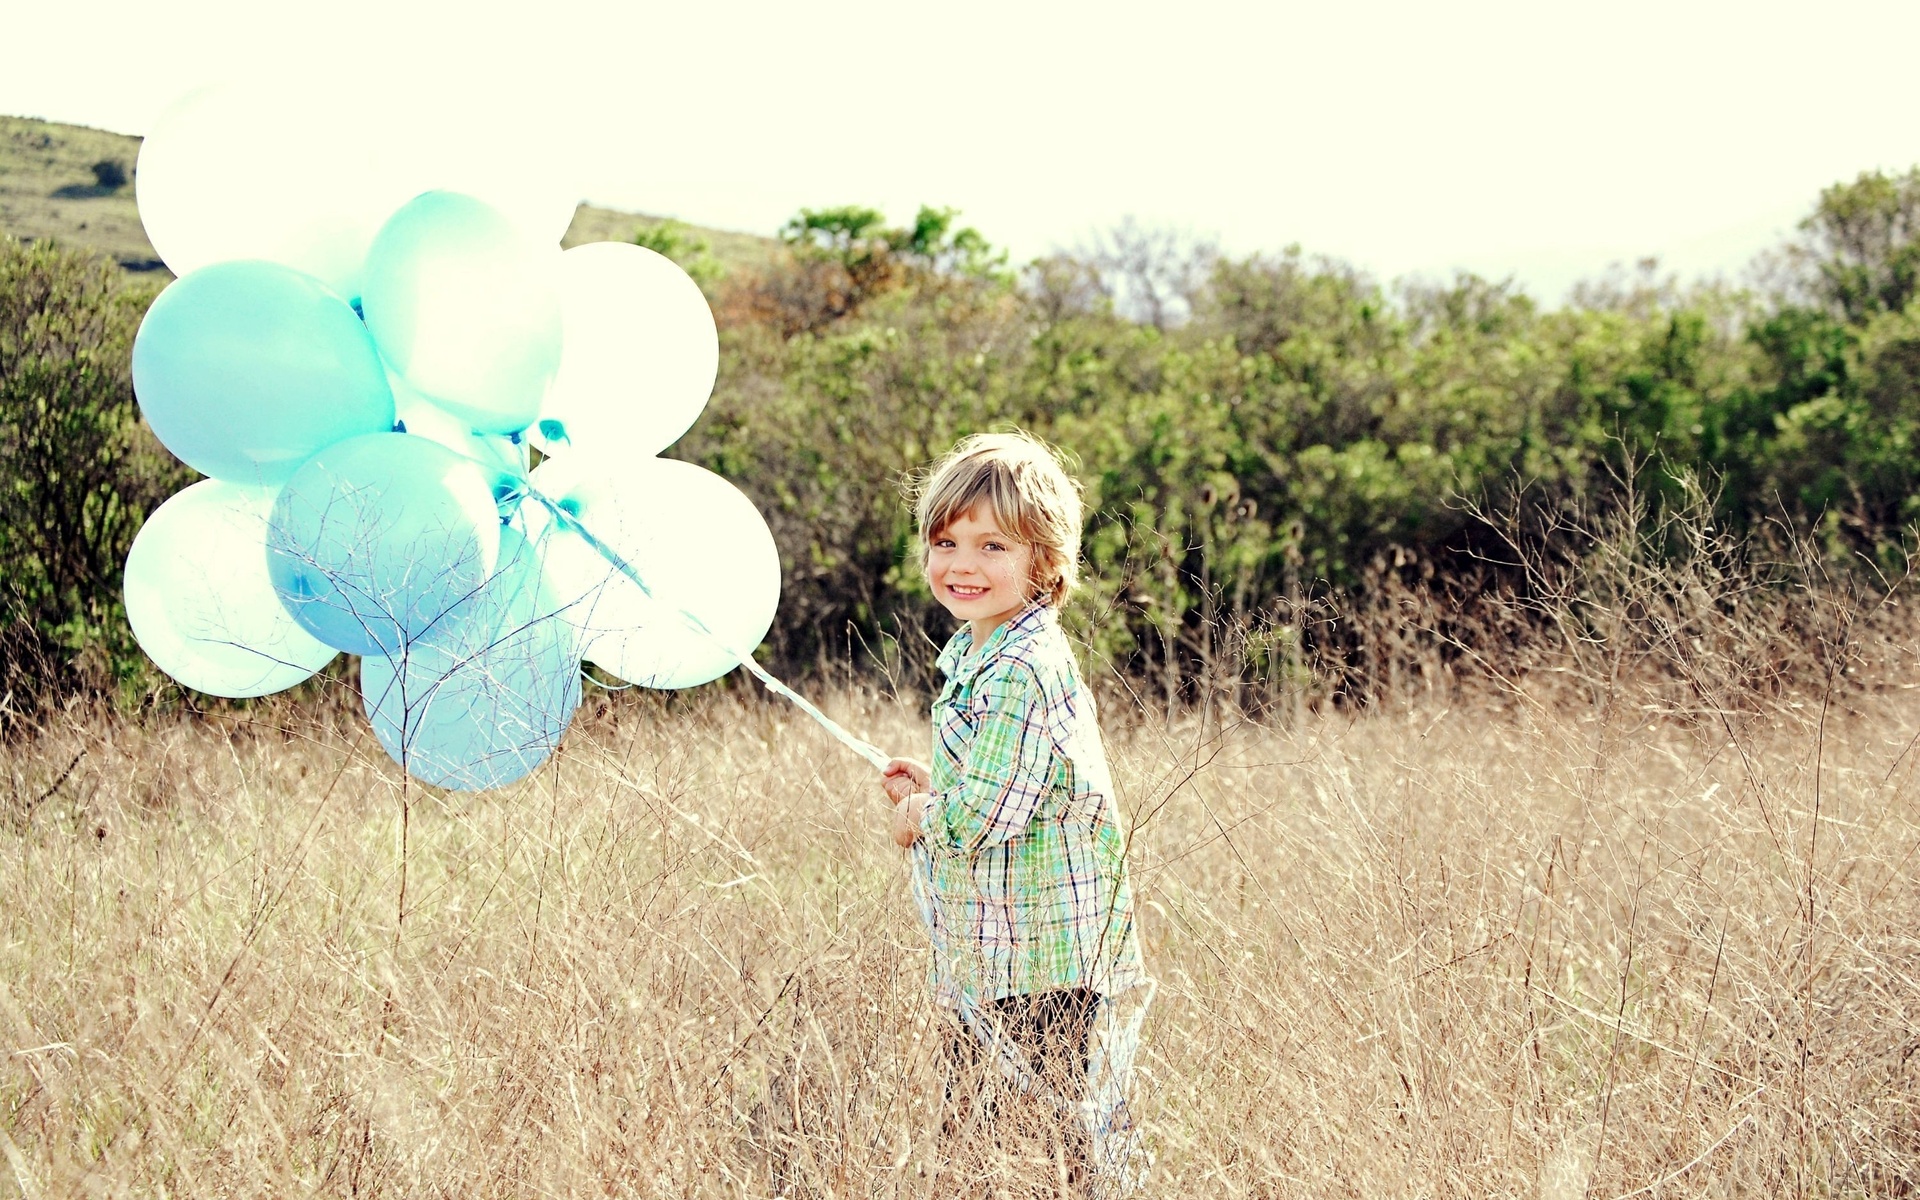 Photography Balloon HD Wallpaper | Background Image